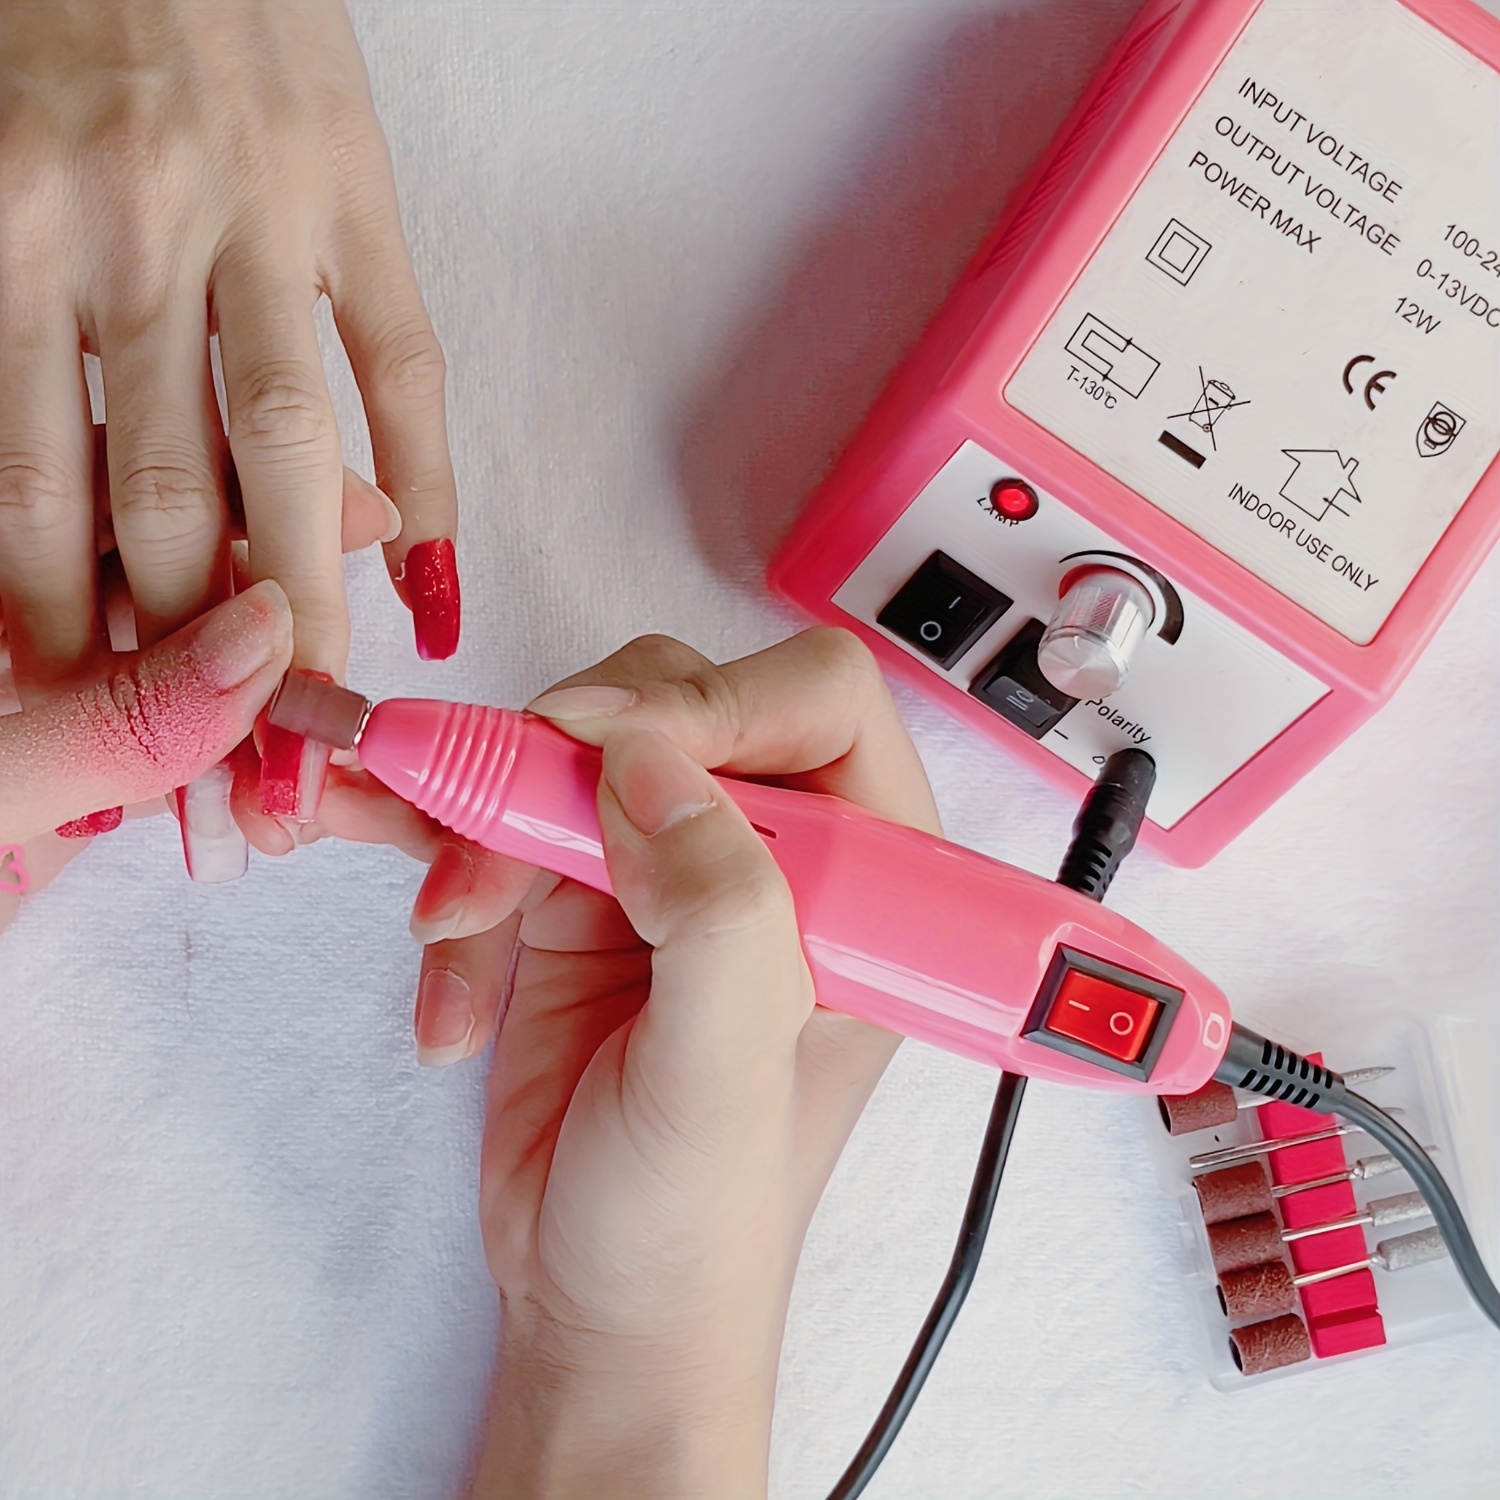 YOKE FELLOW Nail Drill Machine - 35000RPM Electric Nail File Nail Drills  for Acrylic Nails Professional with 6 Drill Bits for Manicure Pedicure Home